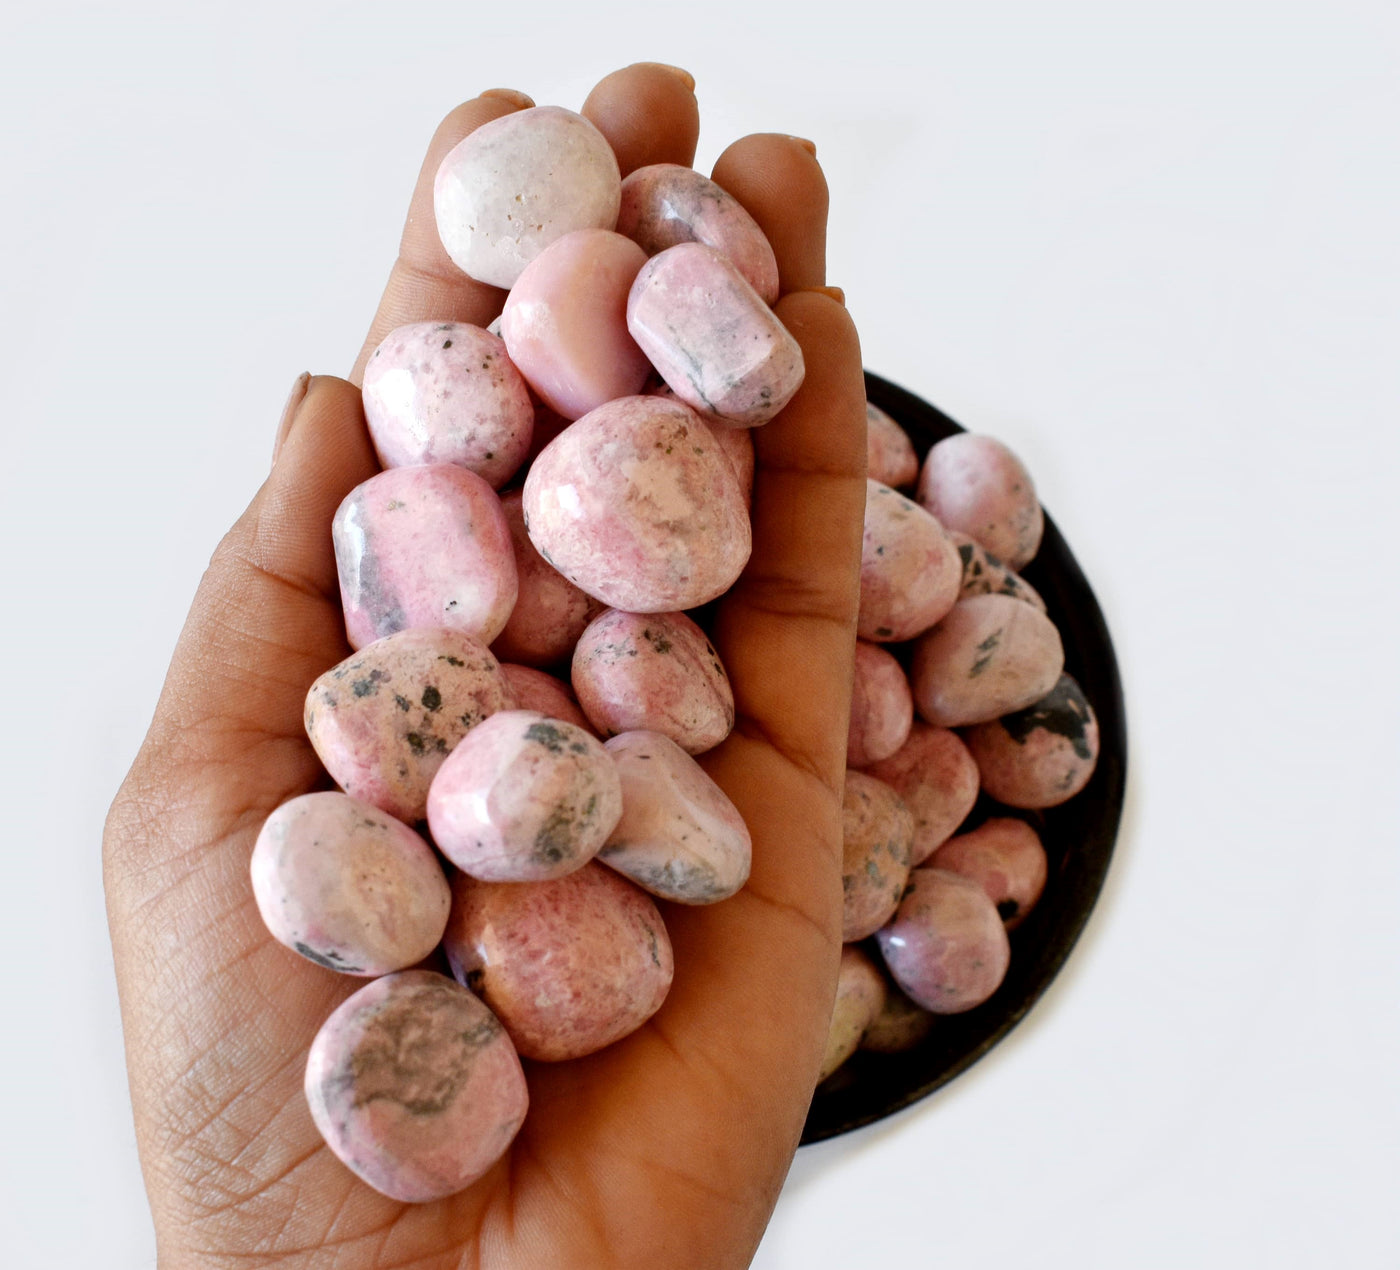 Rhodochrosite Tumbled Crystals (Compassion and Strength)